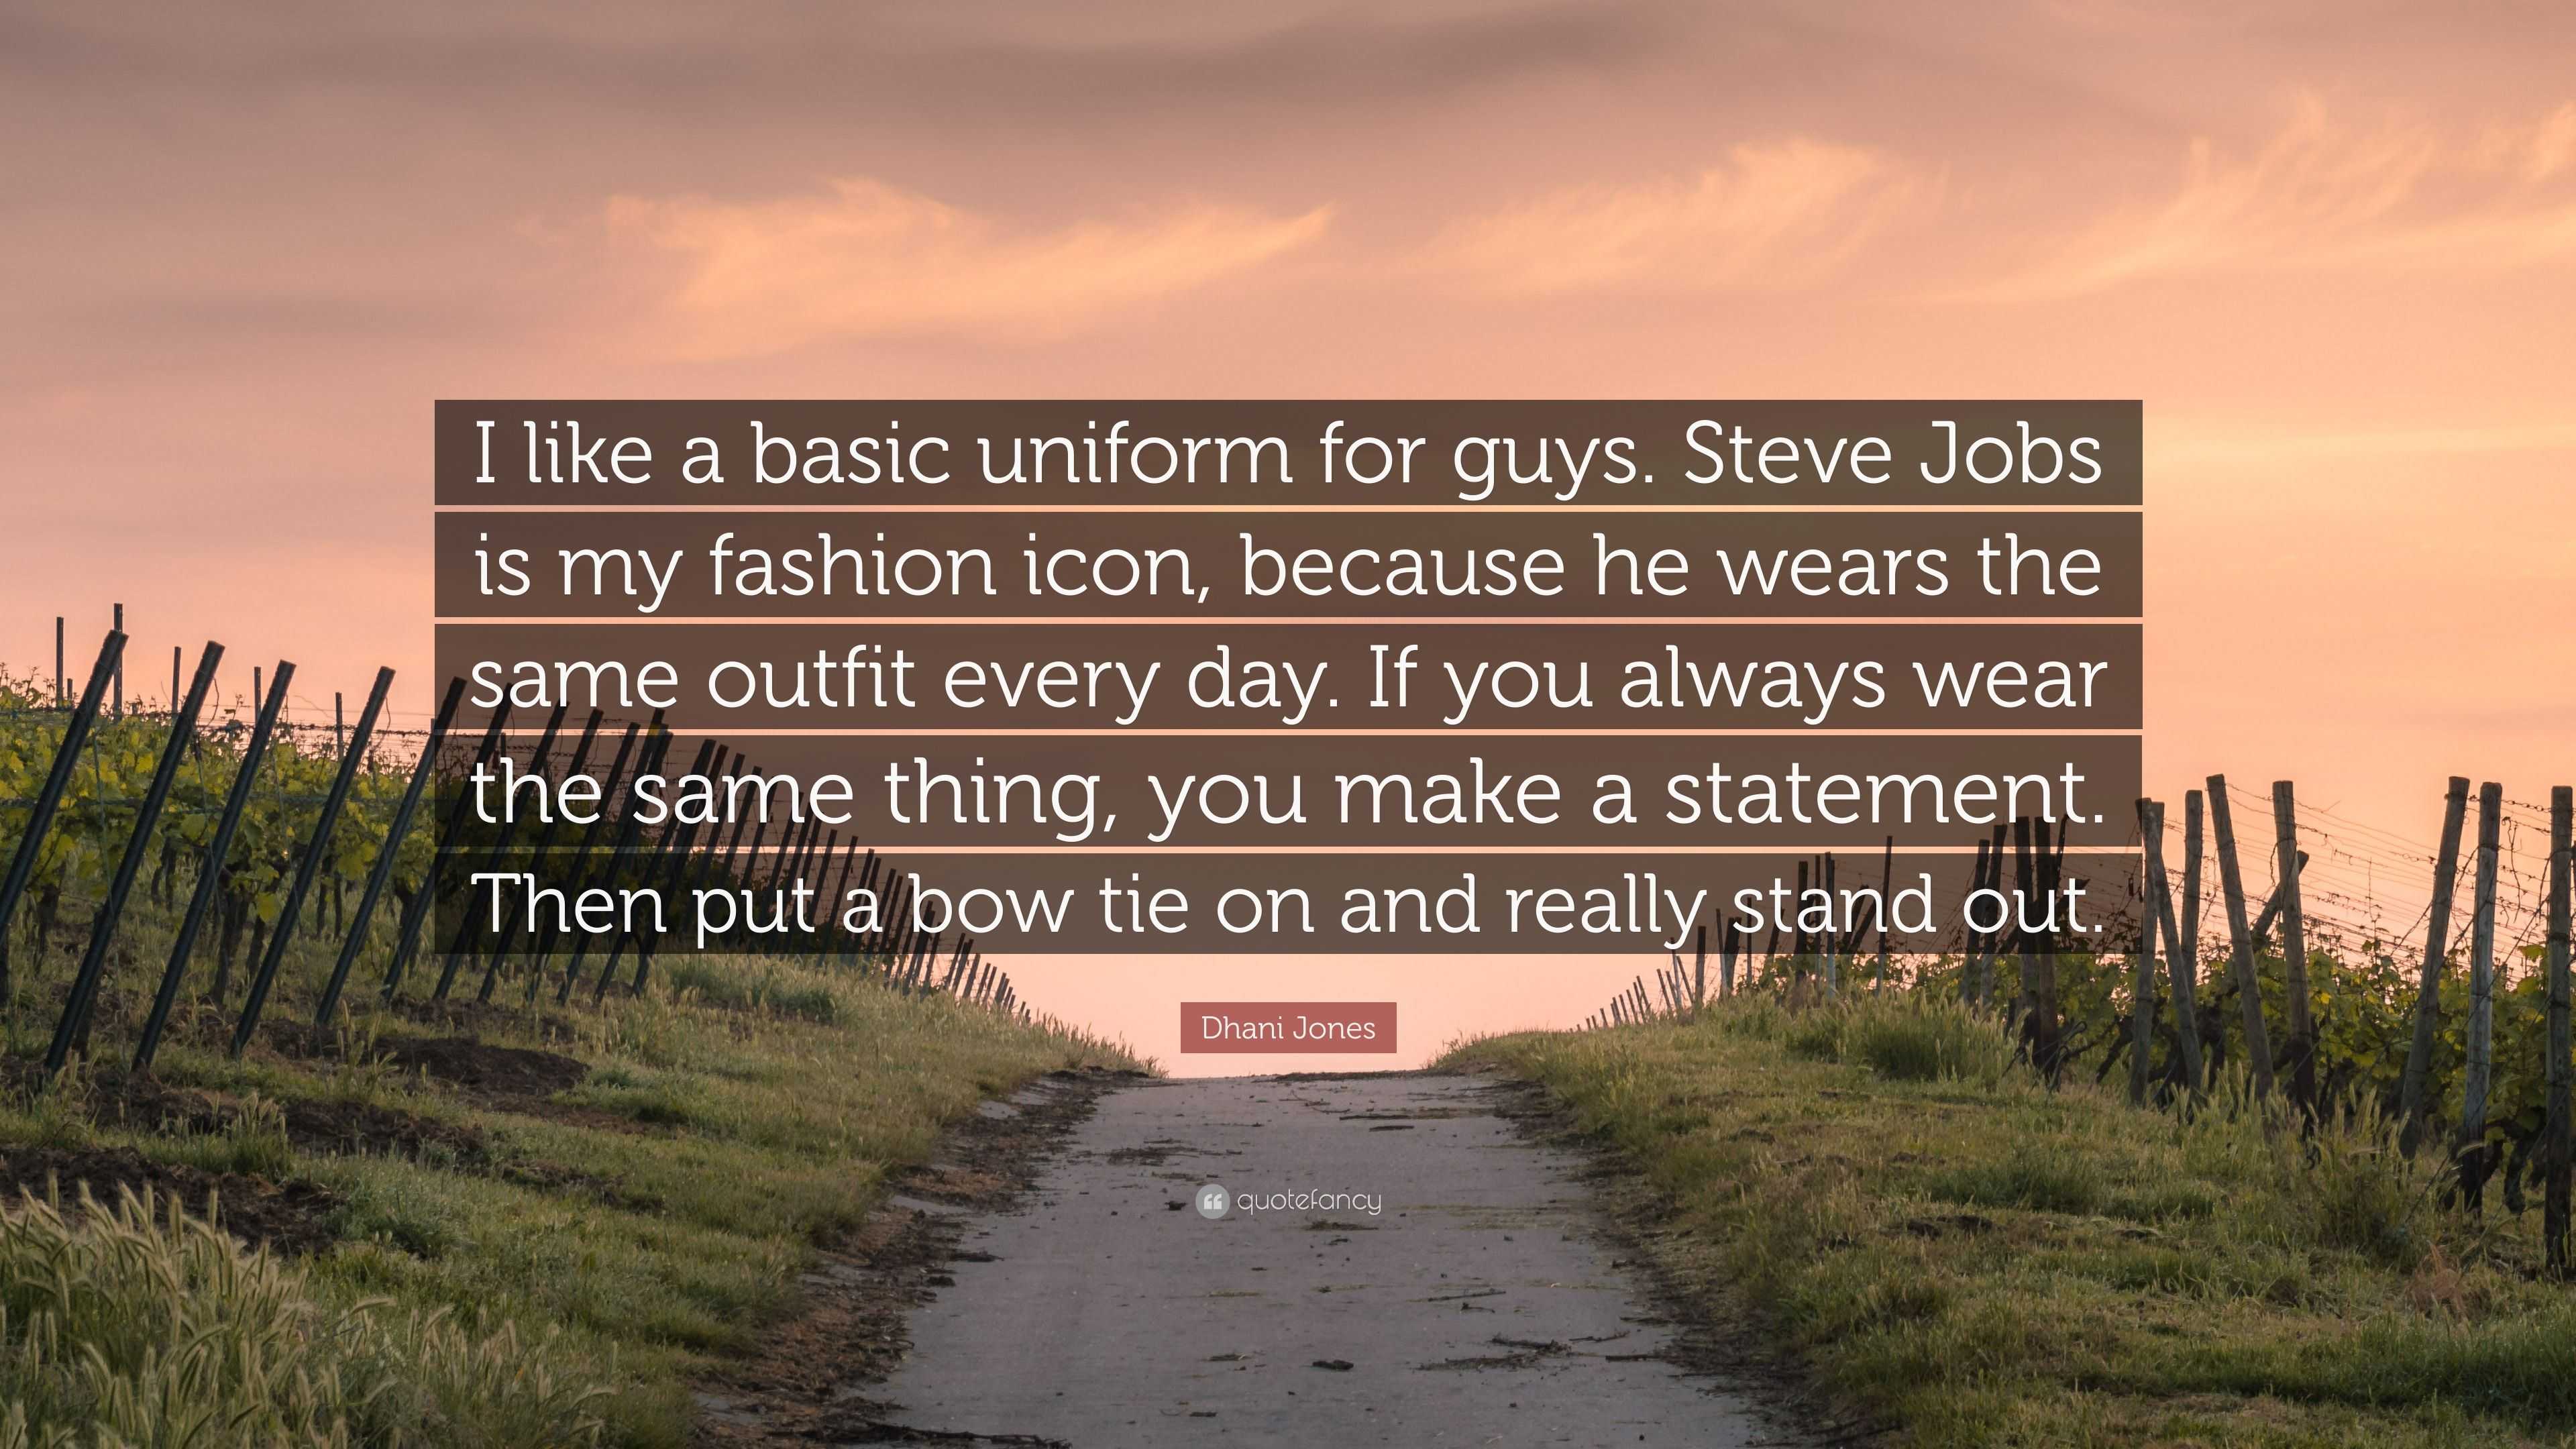 Dhani Jones Quote: “I like a basic uniform for guys. Steve Jobs is my  fashion icon, because he wears the same outfit every day. If you alway...”